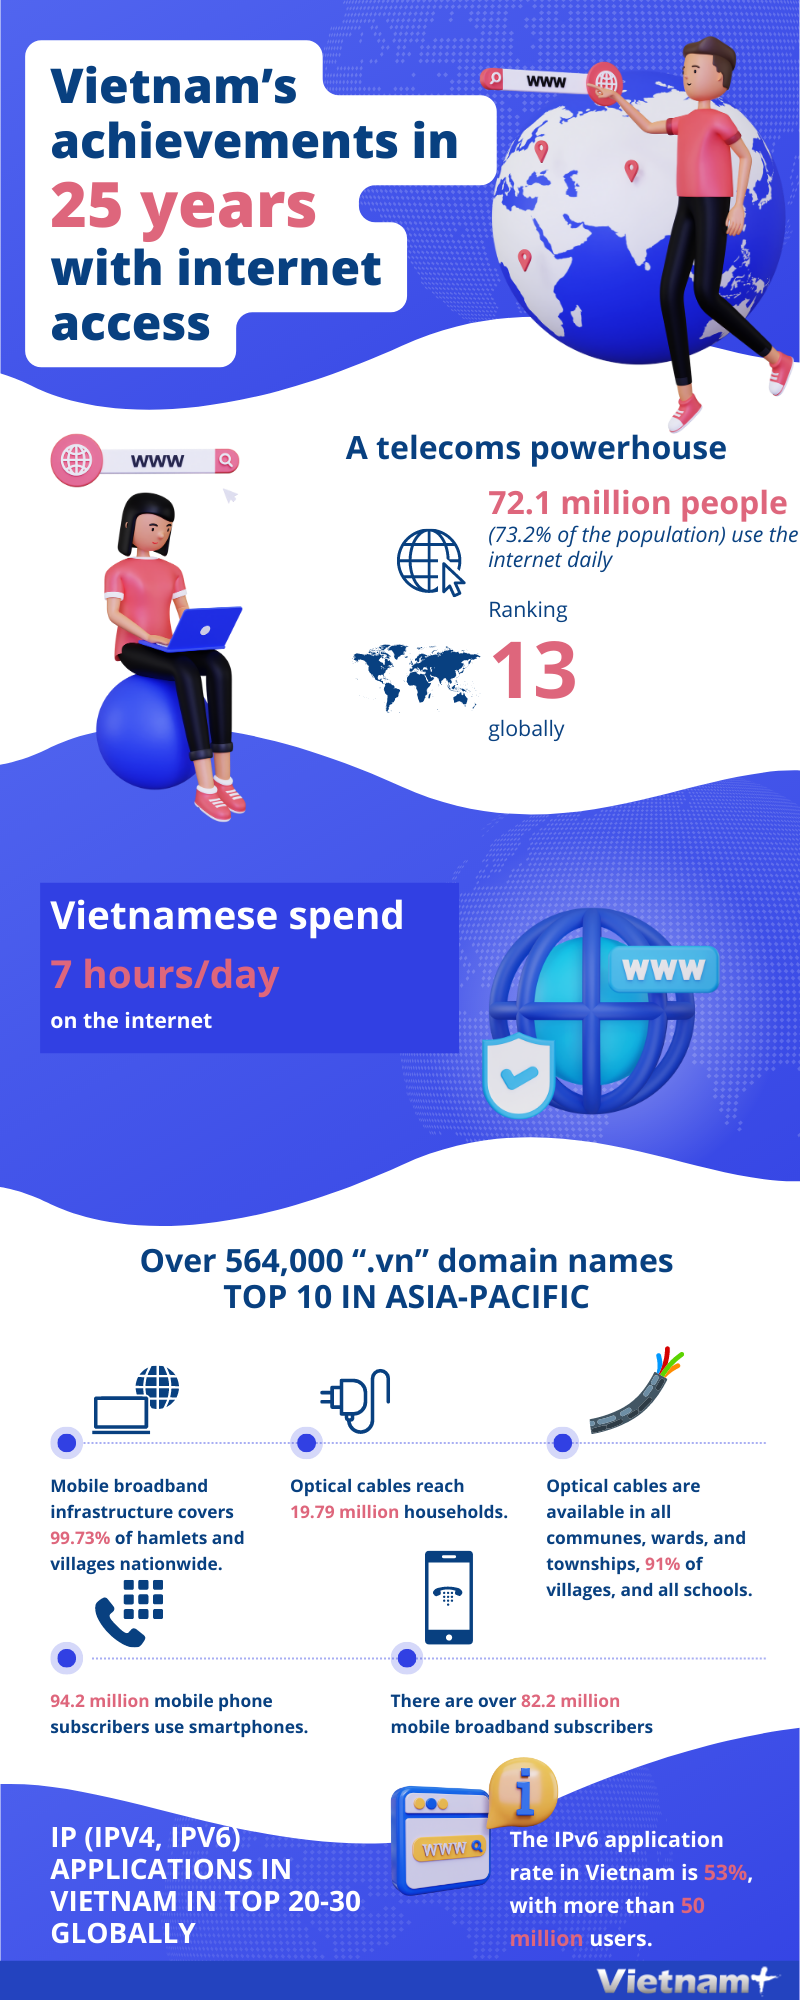 Vietnam’s achievements in 25 years with internet access hinh anh 1